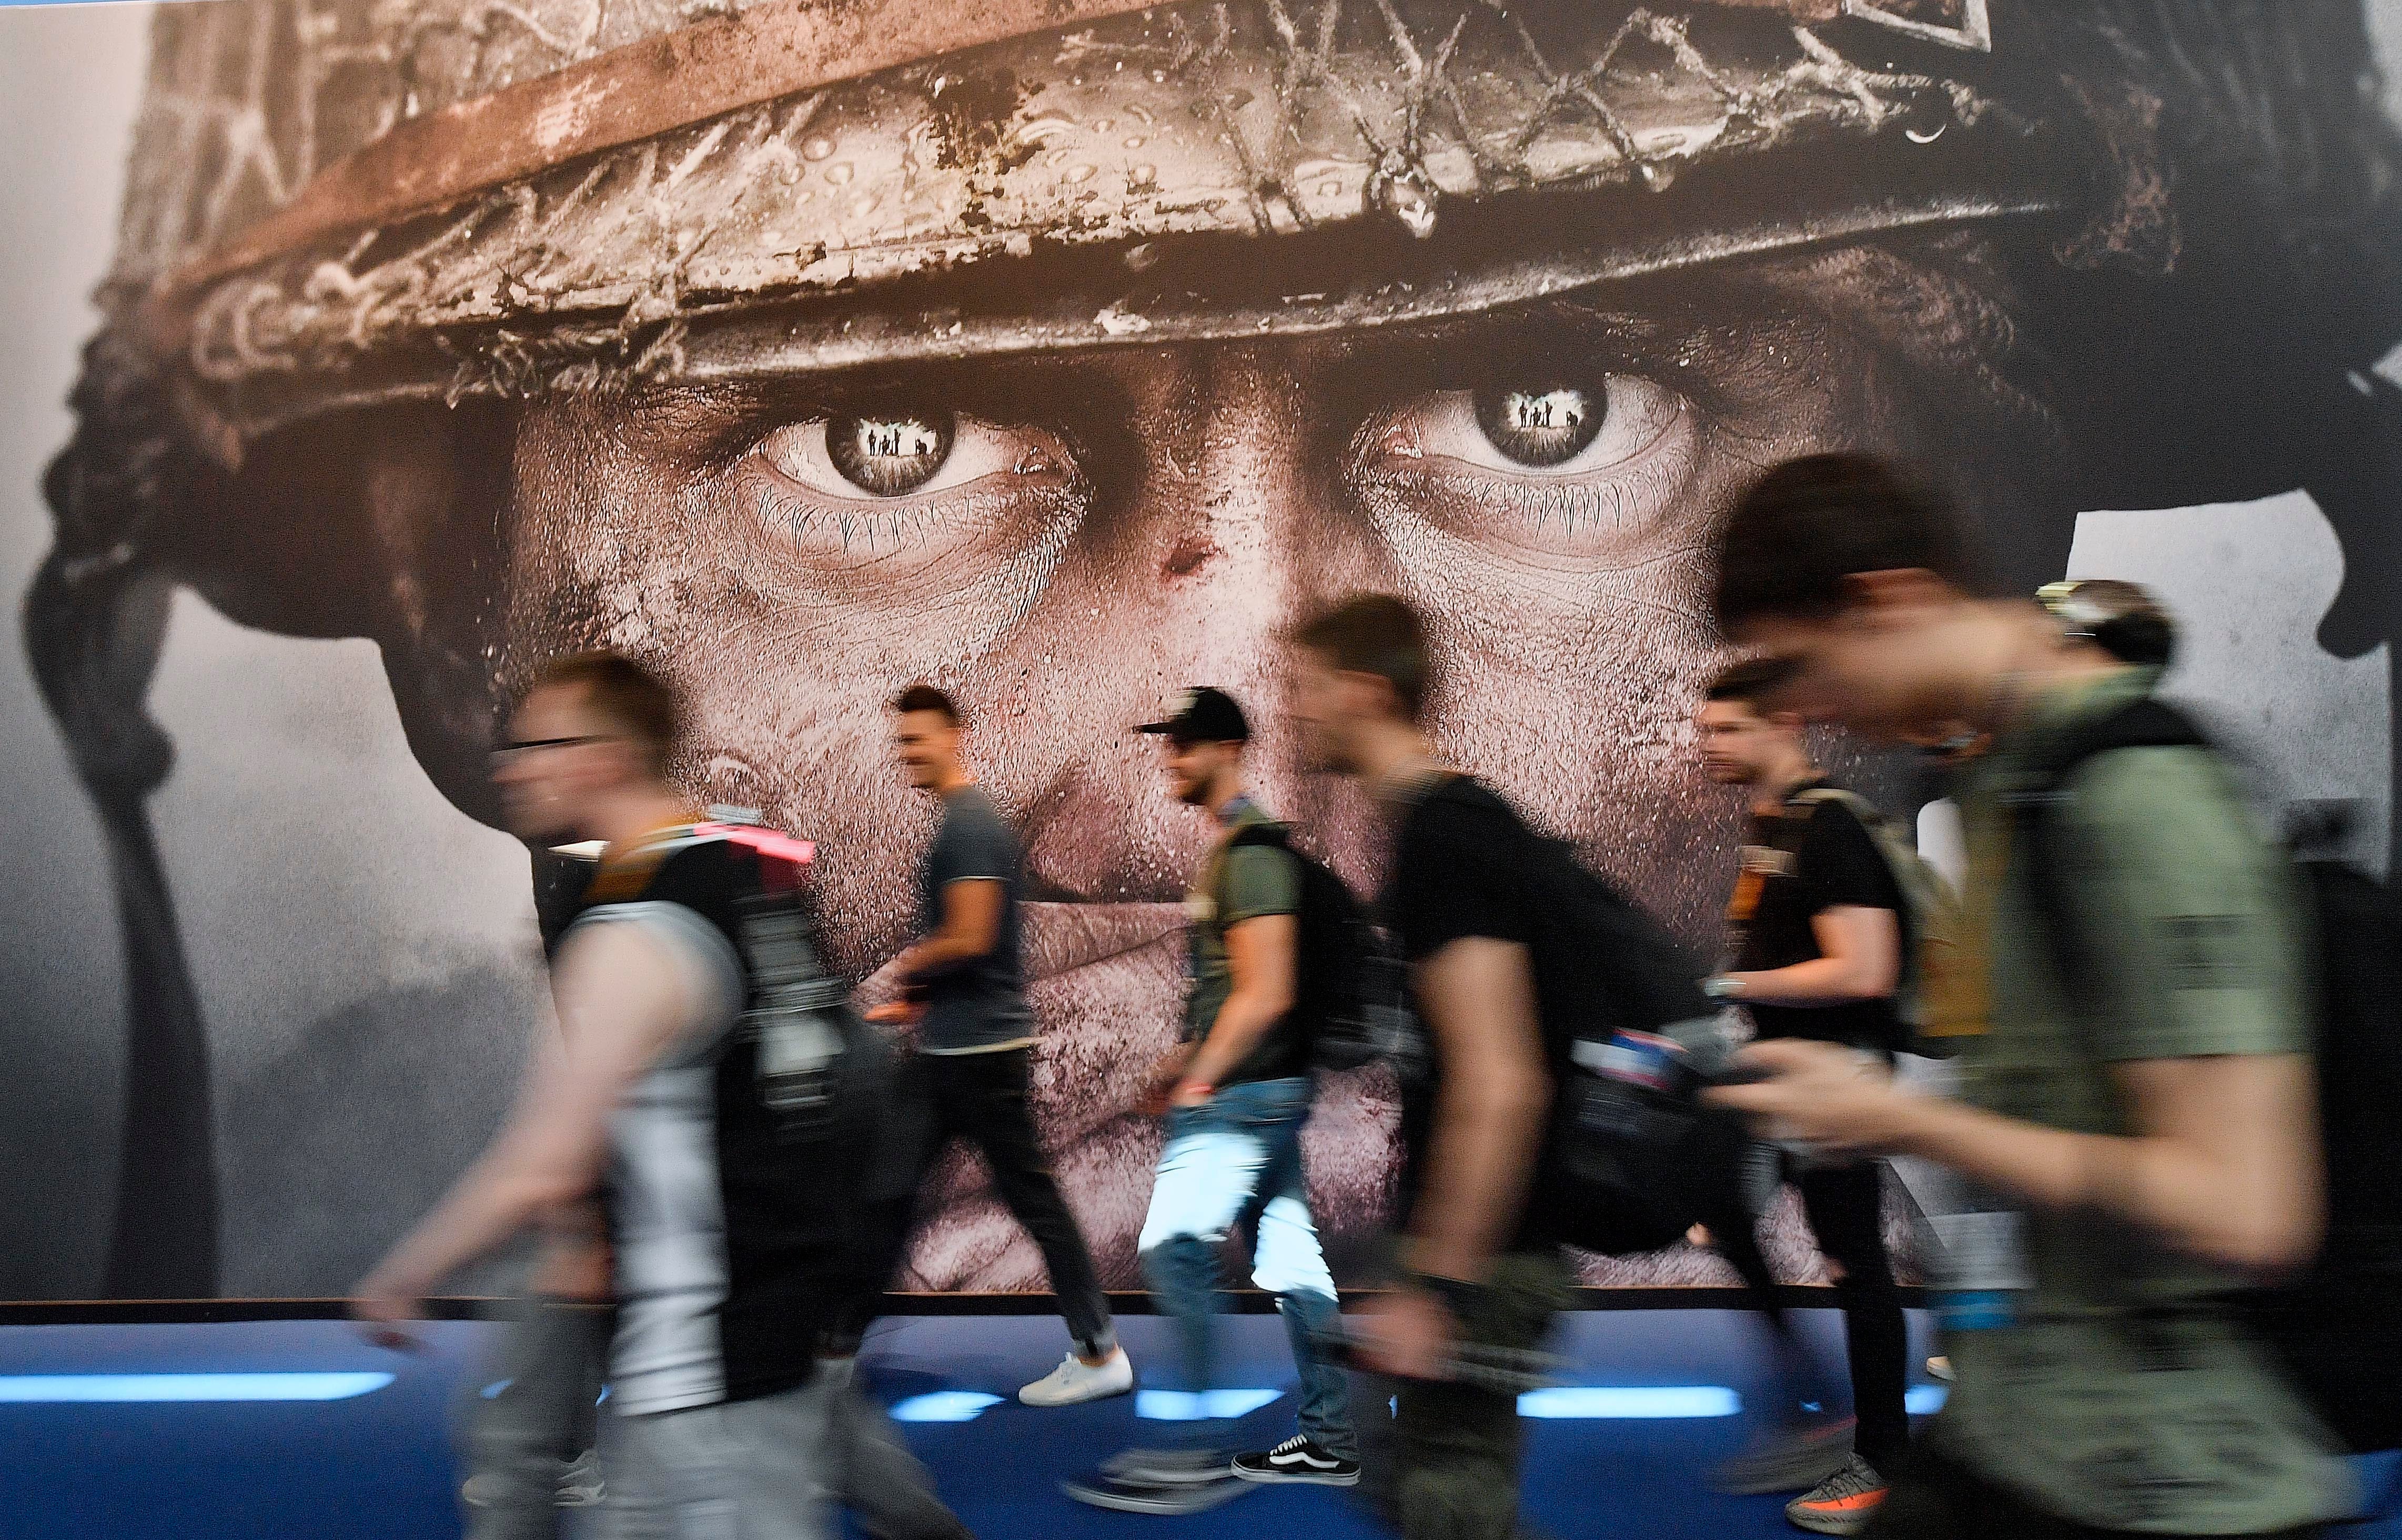 UK Blocks Microsoft Activision Deal Over Game Pass